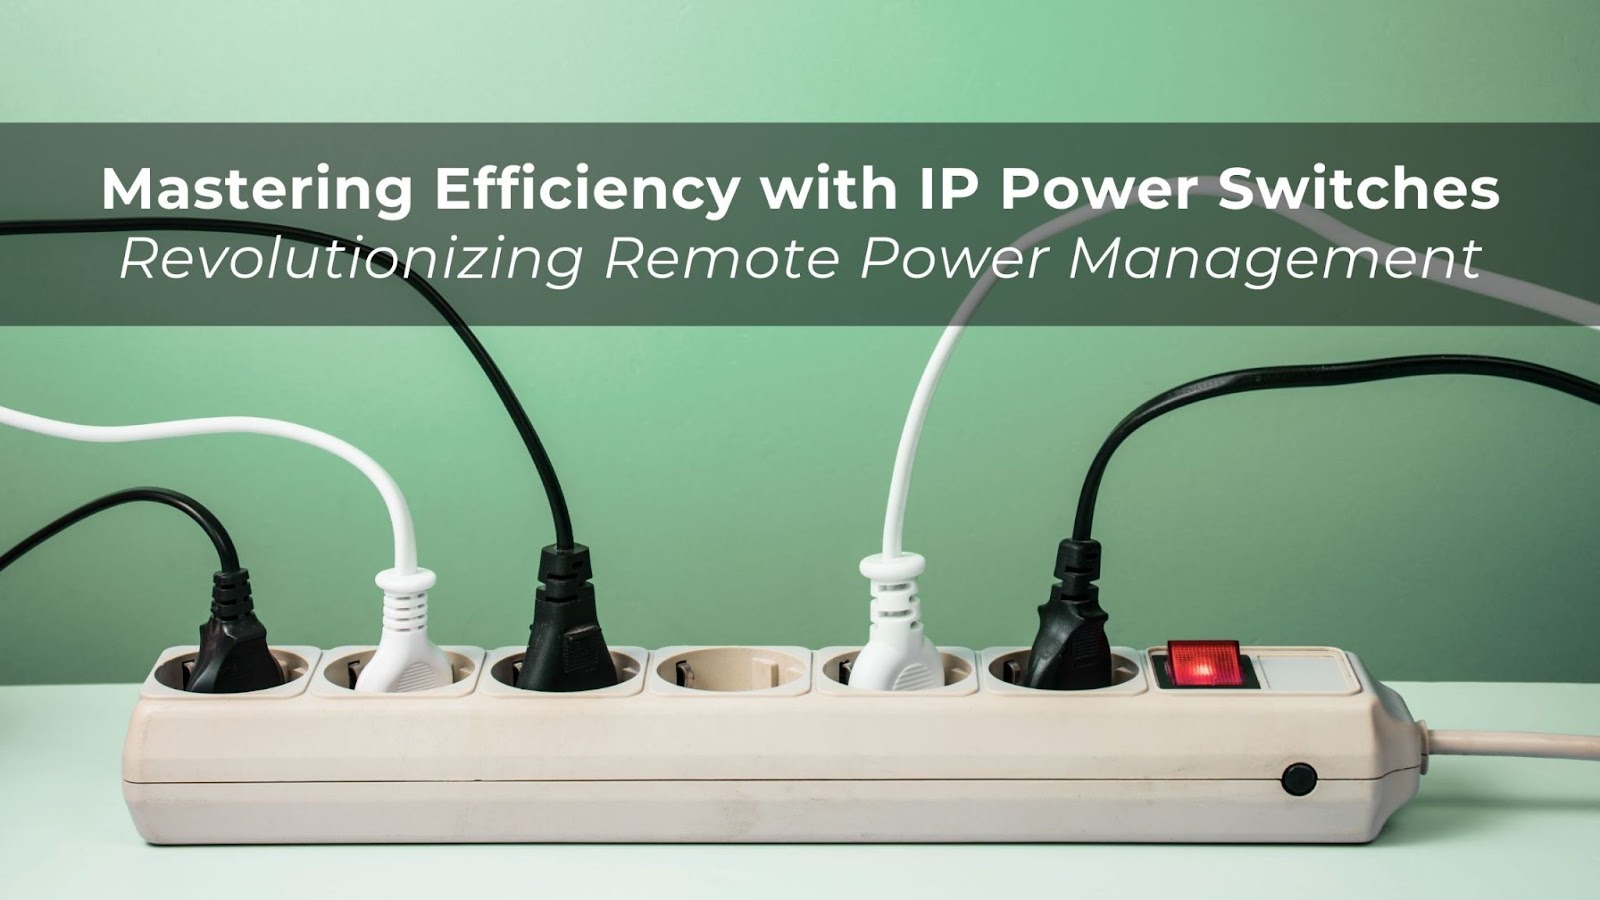 MASTERING EFFICIENCY WITH IP POWER SWITCHES: REVOLUTIONIZING REMOTE POWER MANAGEMENT